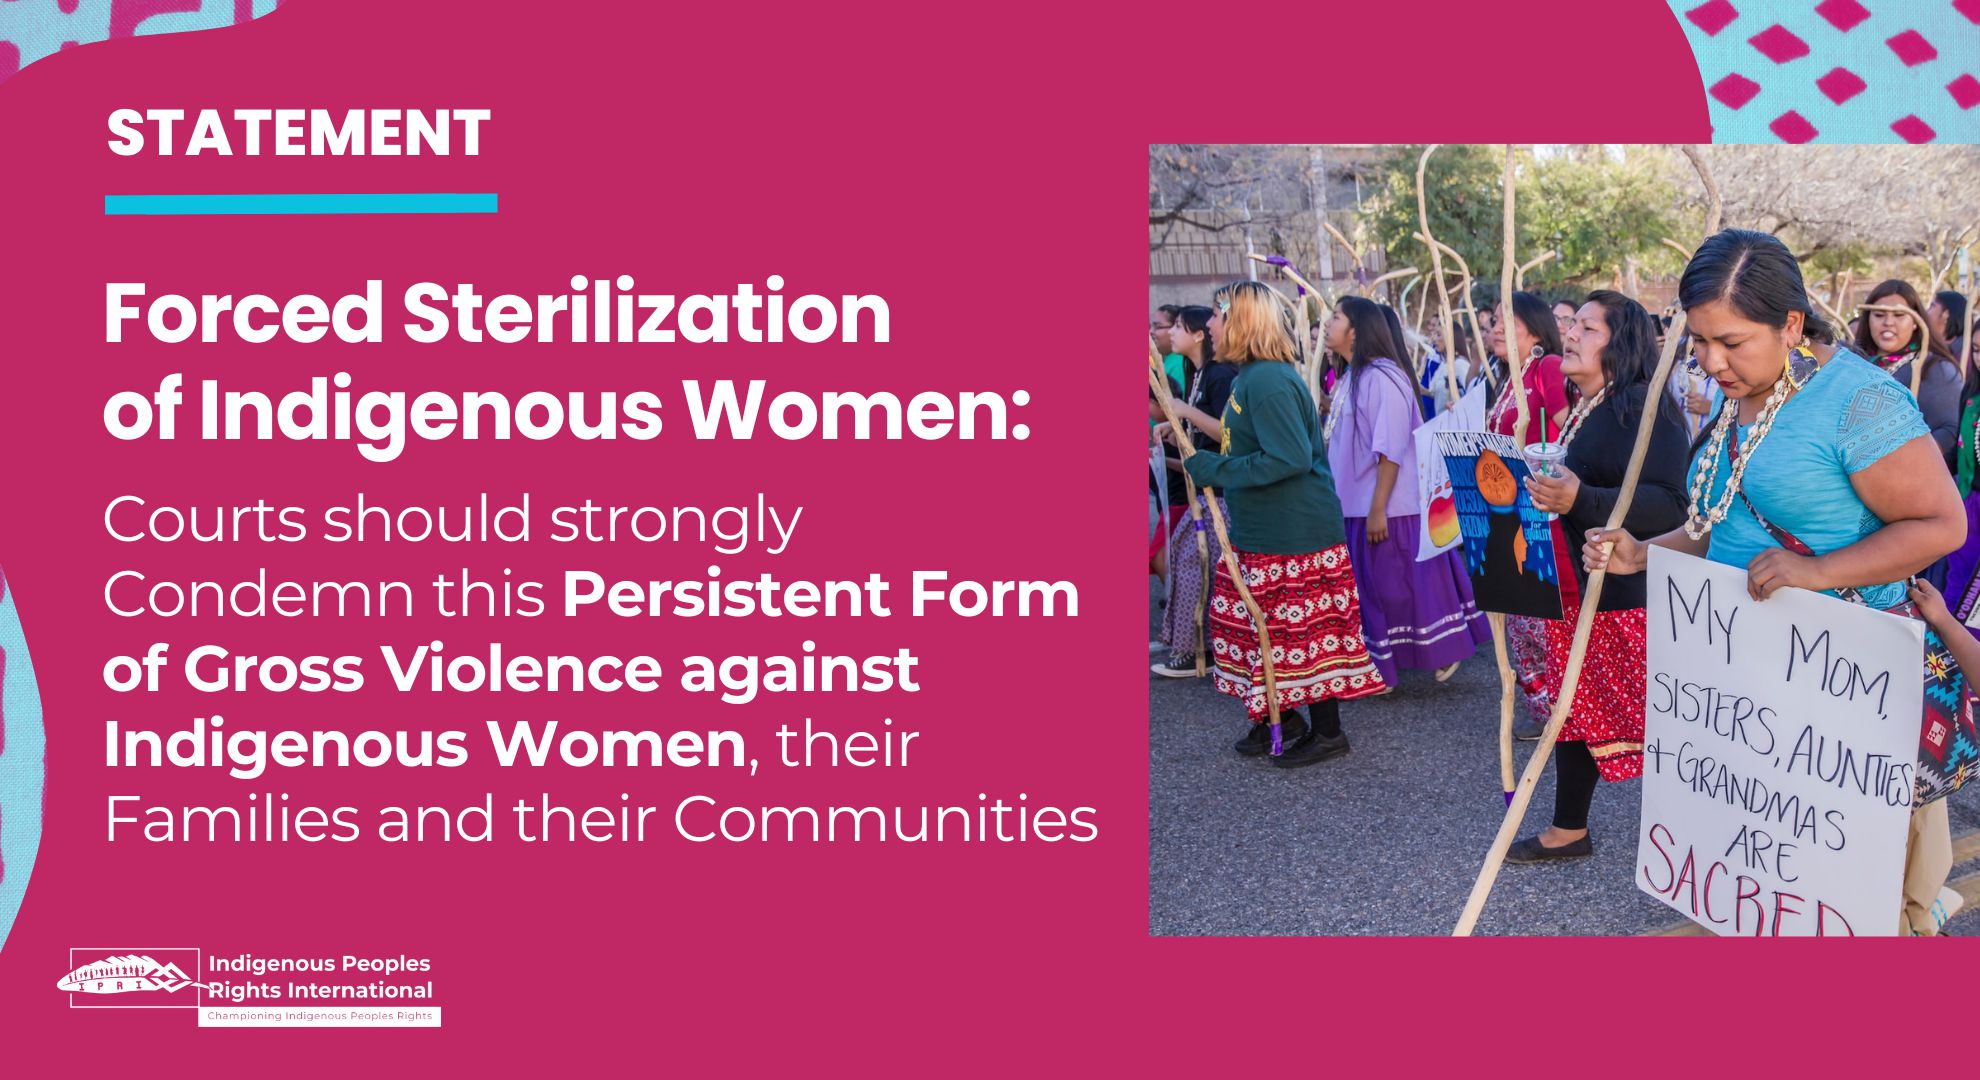 Forced Sterilization of Indigenous Women: Courts should strongly Condemn this Persistent Form of Gross Violence against Indigenous Women, their Families and their Communities